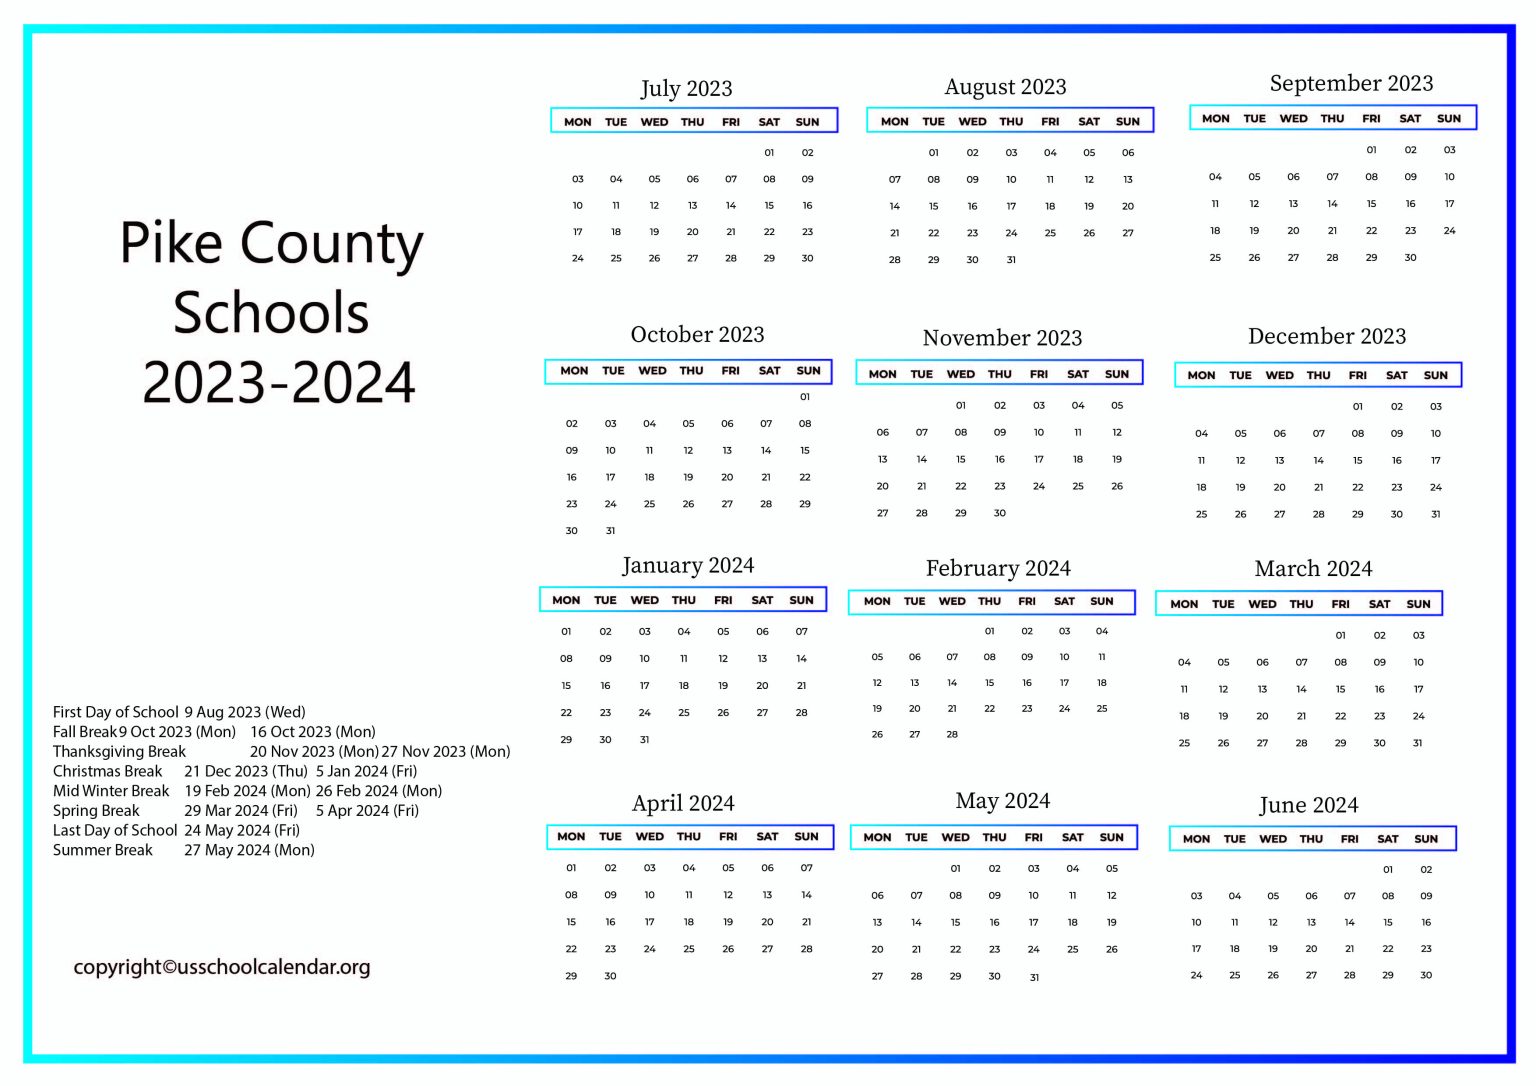 pike-county-schools-calendar-with-holidays-2023-2024